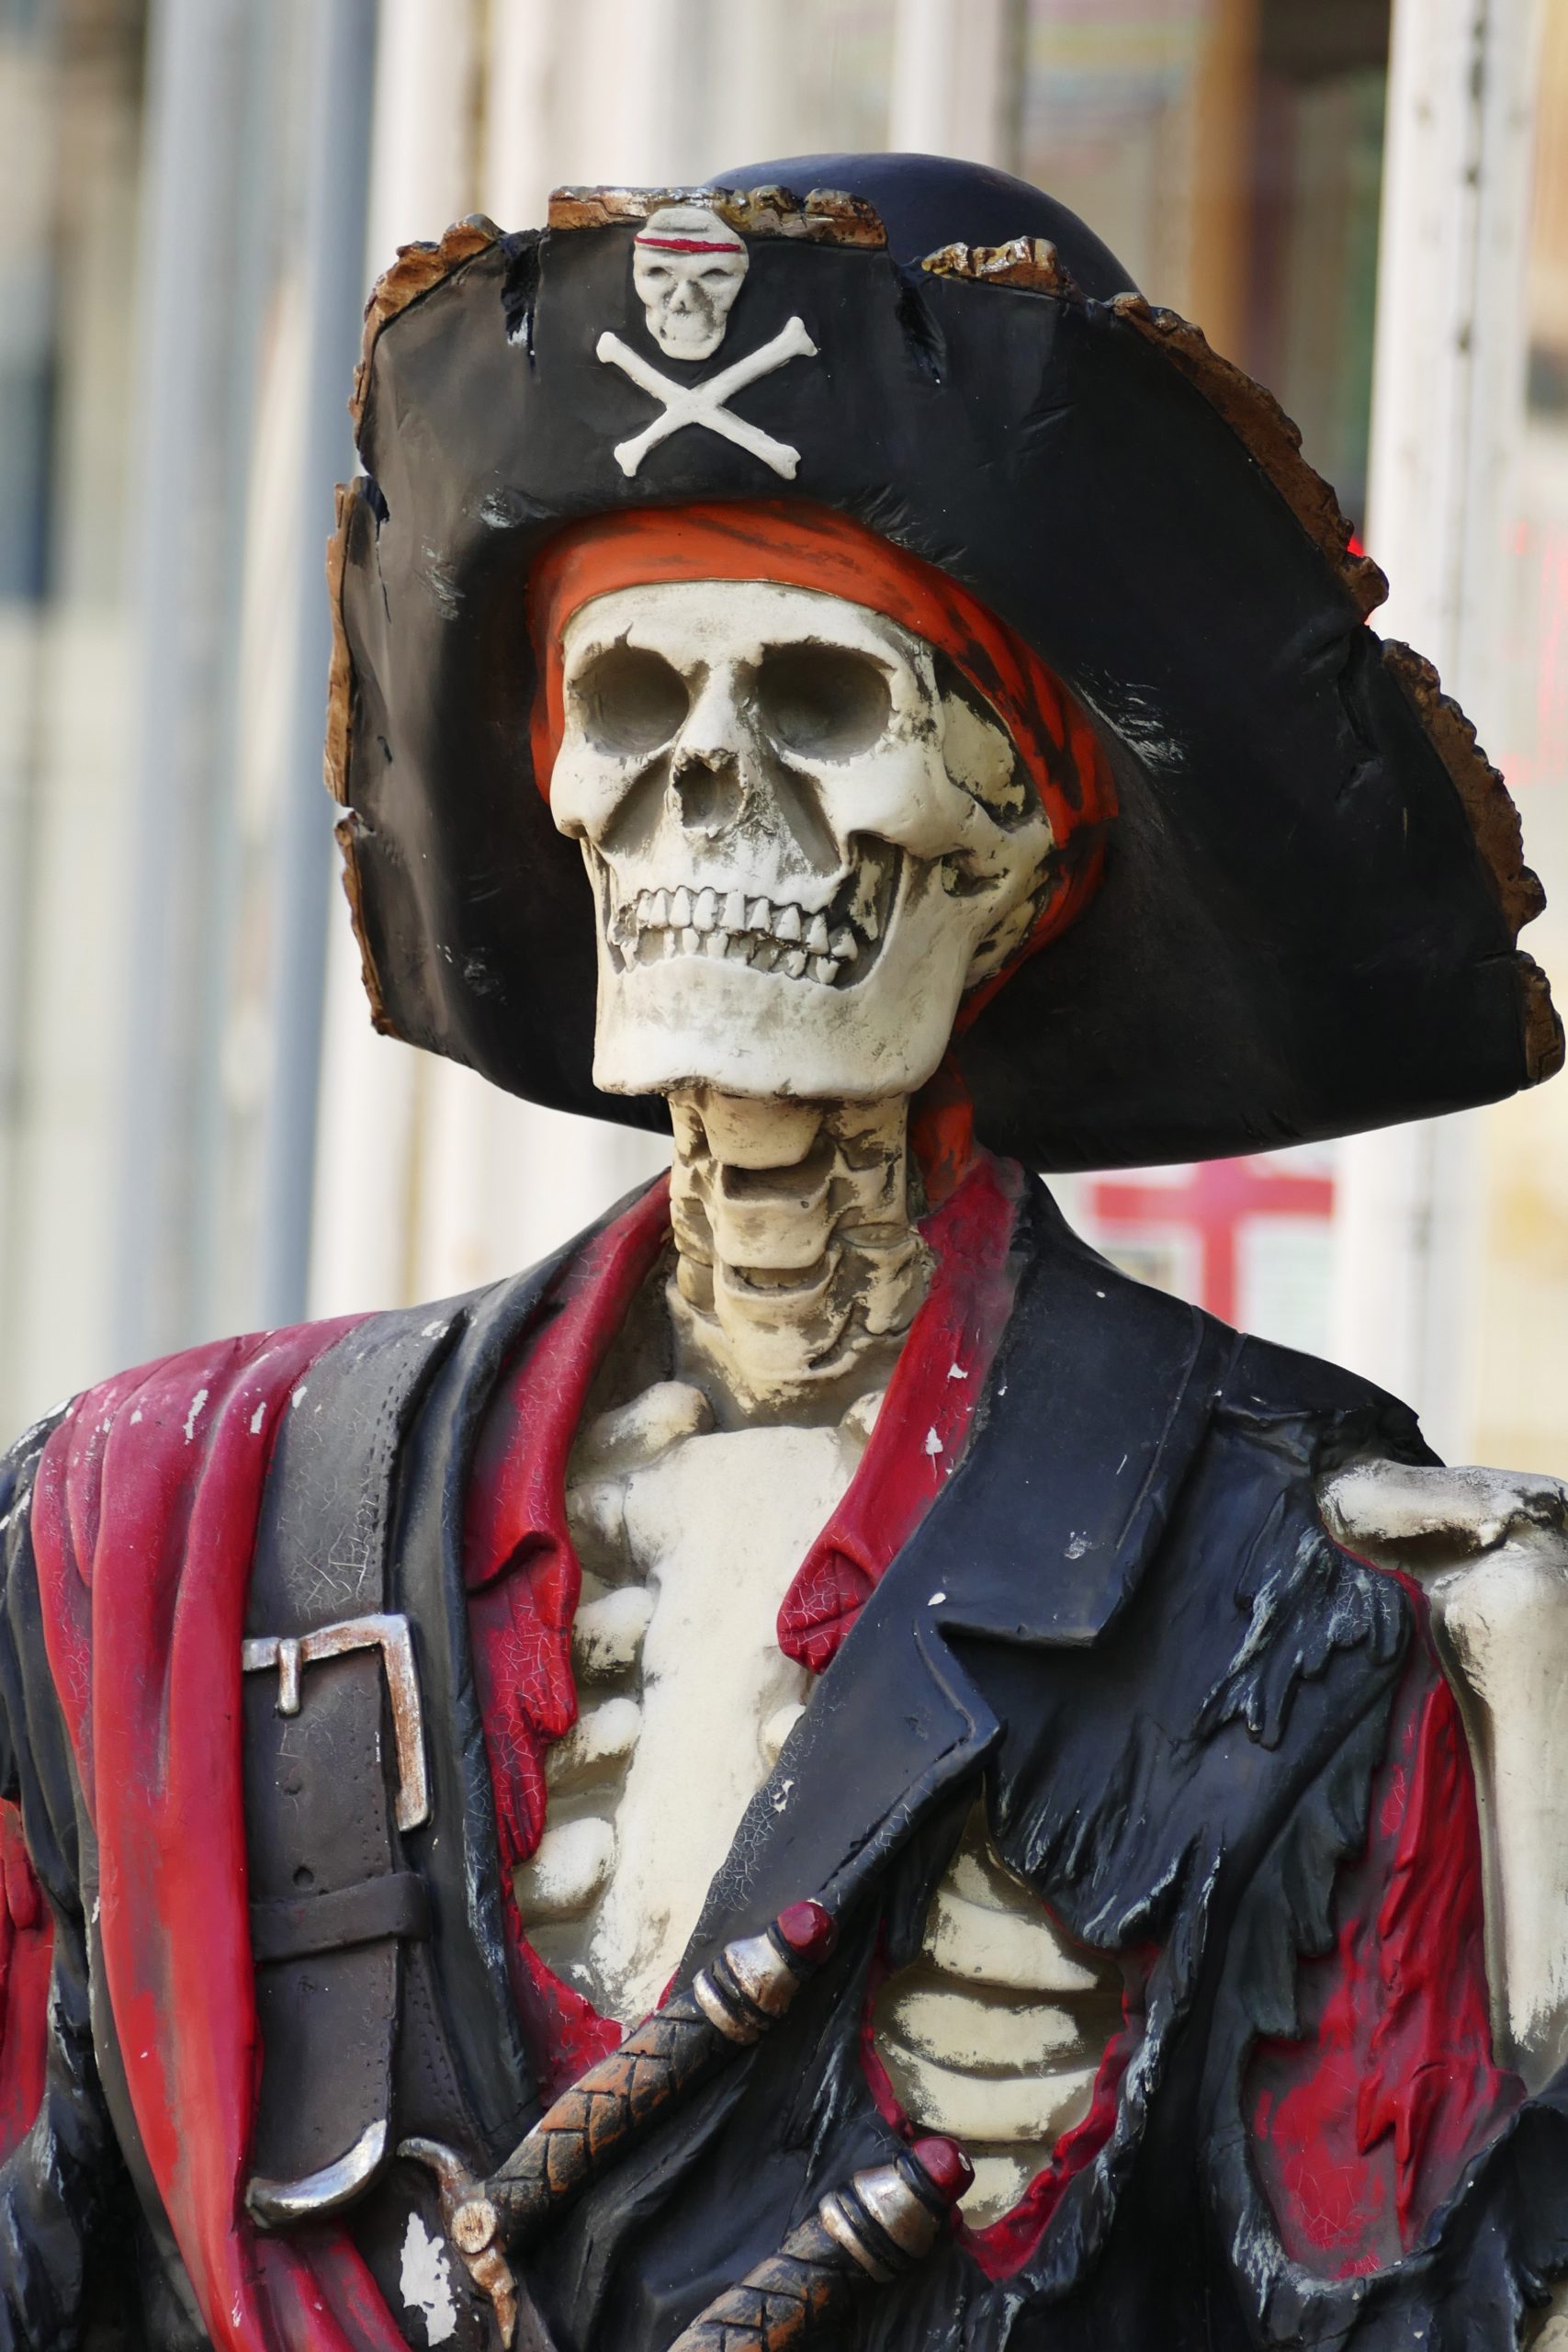 A wooden scuplture os a skeletpexels-anthony-5626573on dressed in pirate garb.